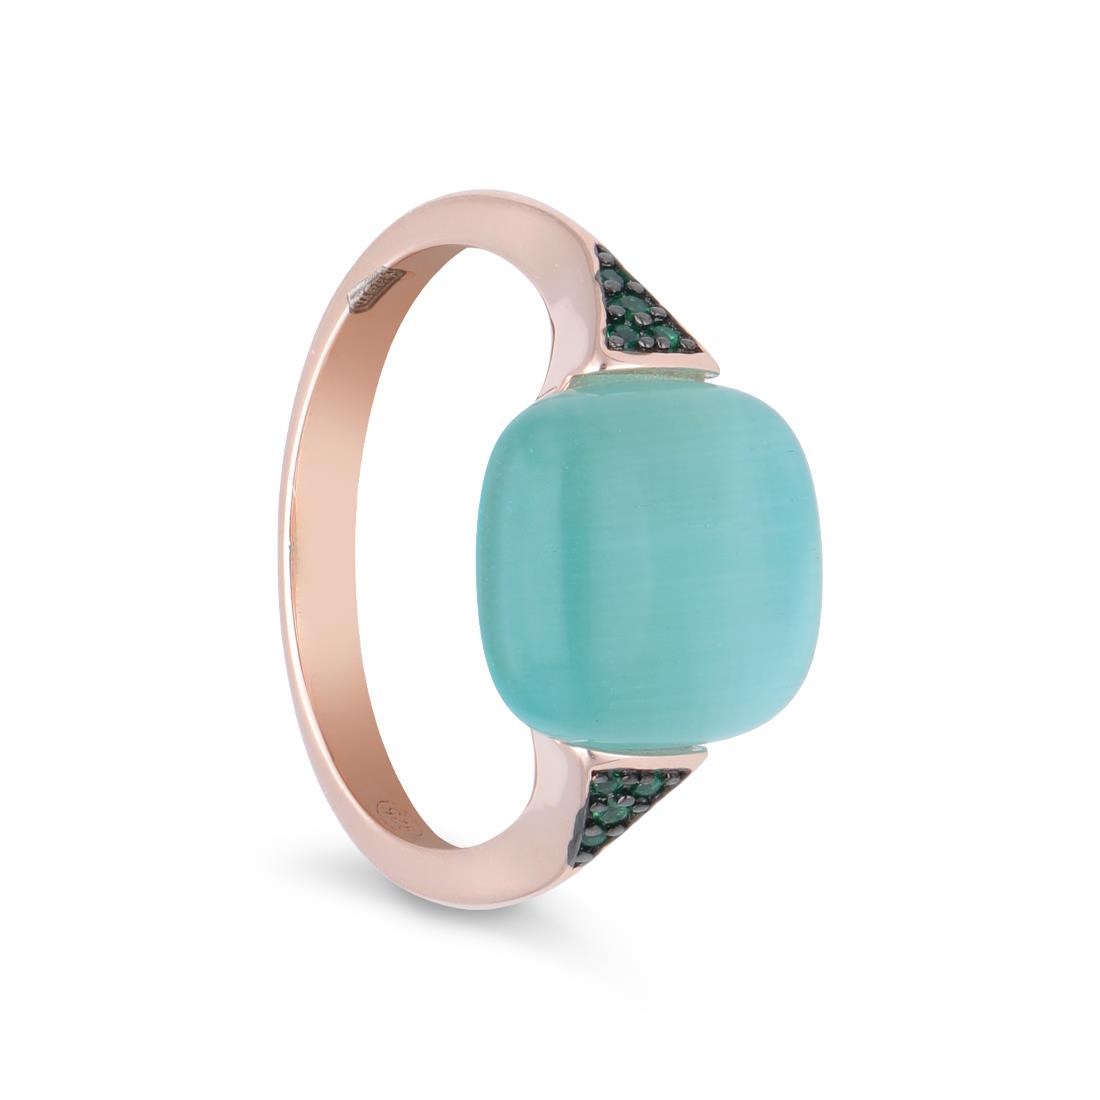 Pink silver ring with green stone - ORO&CO 925